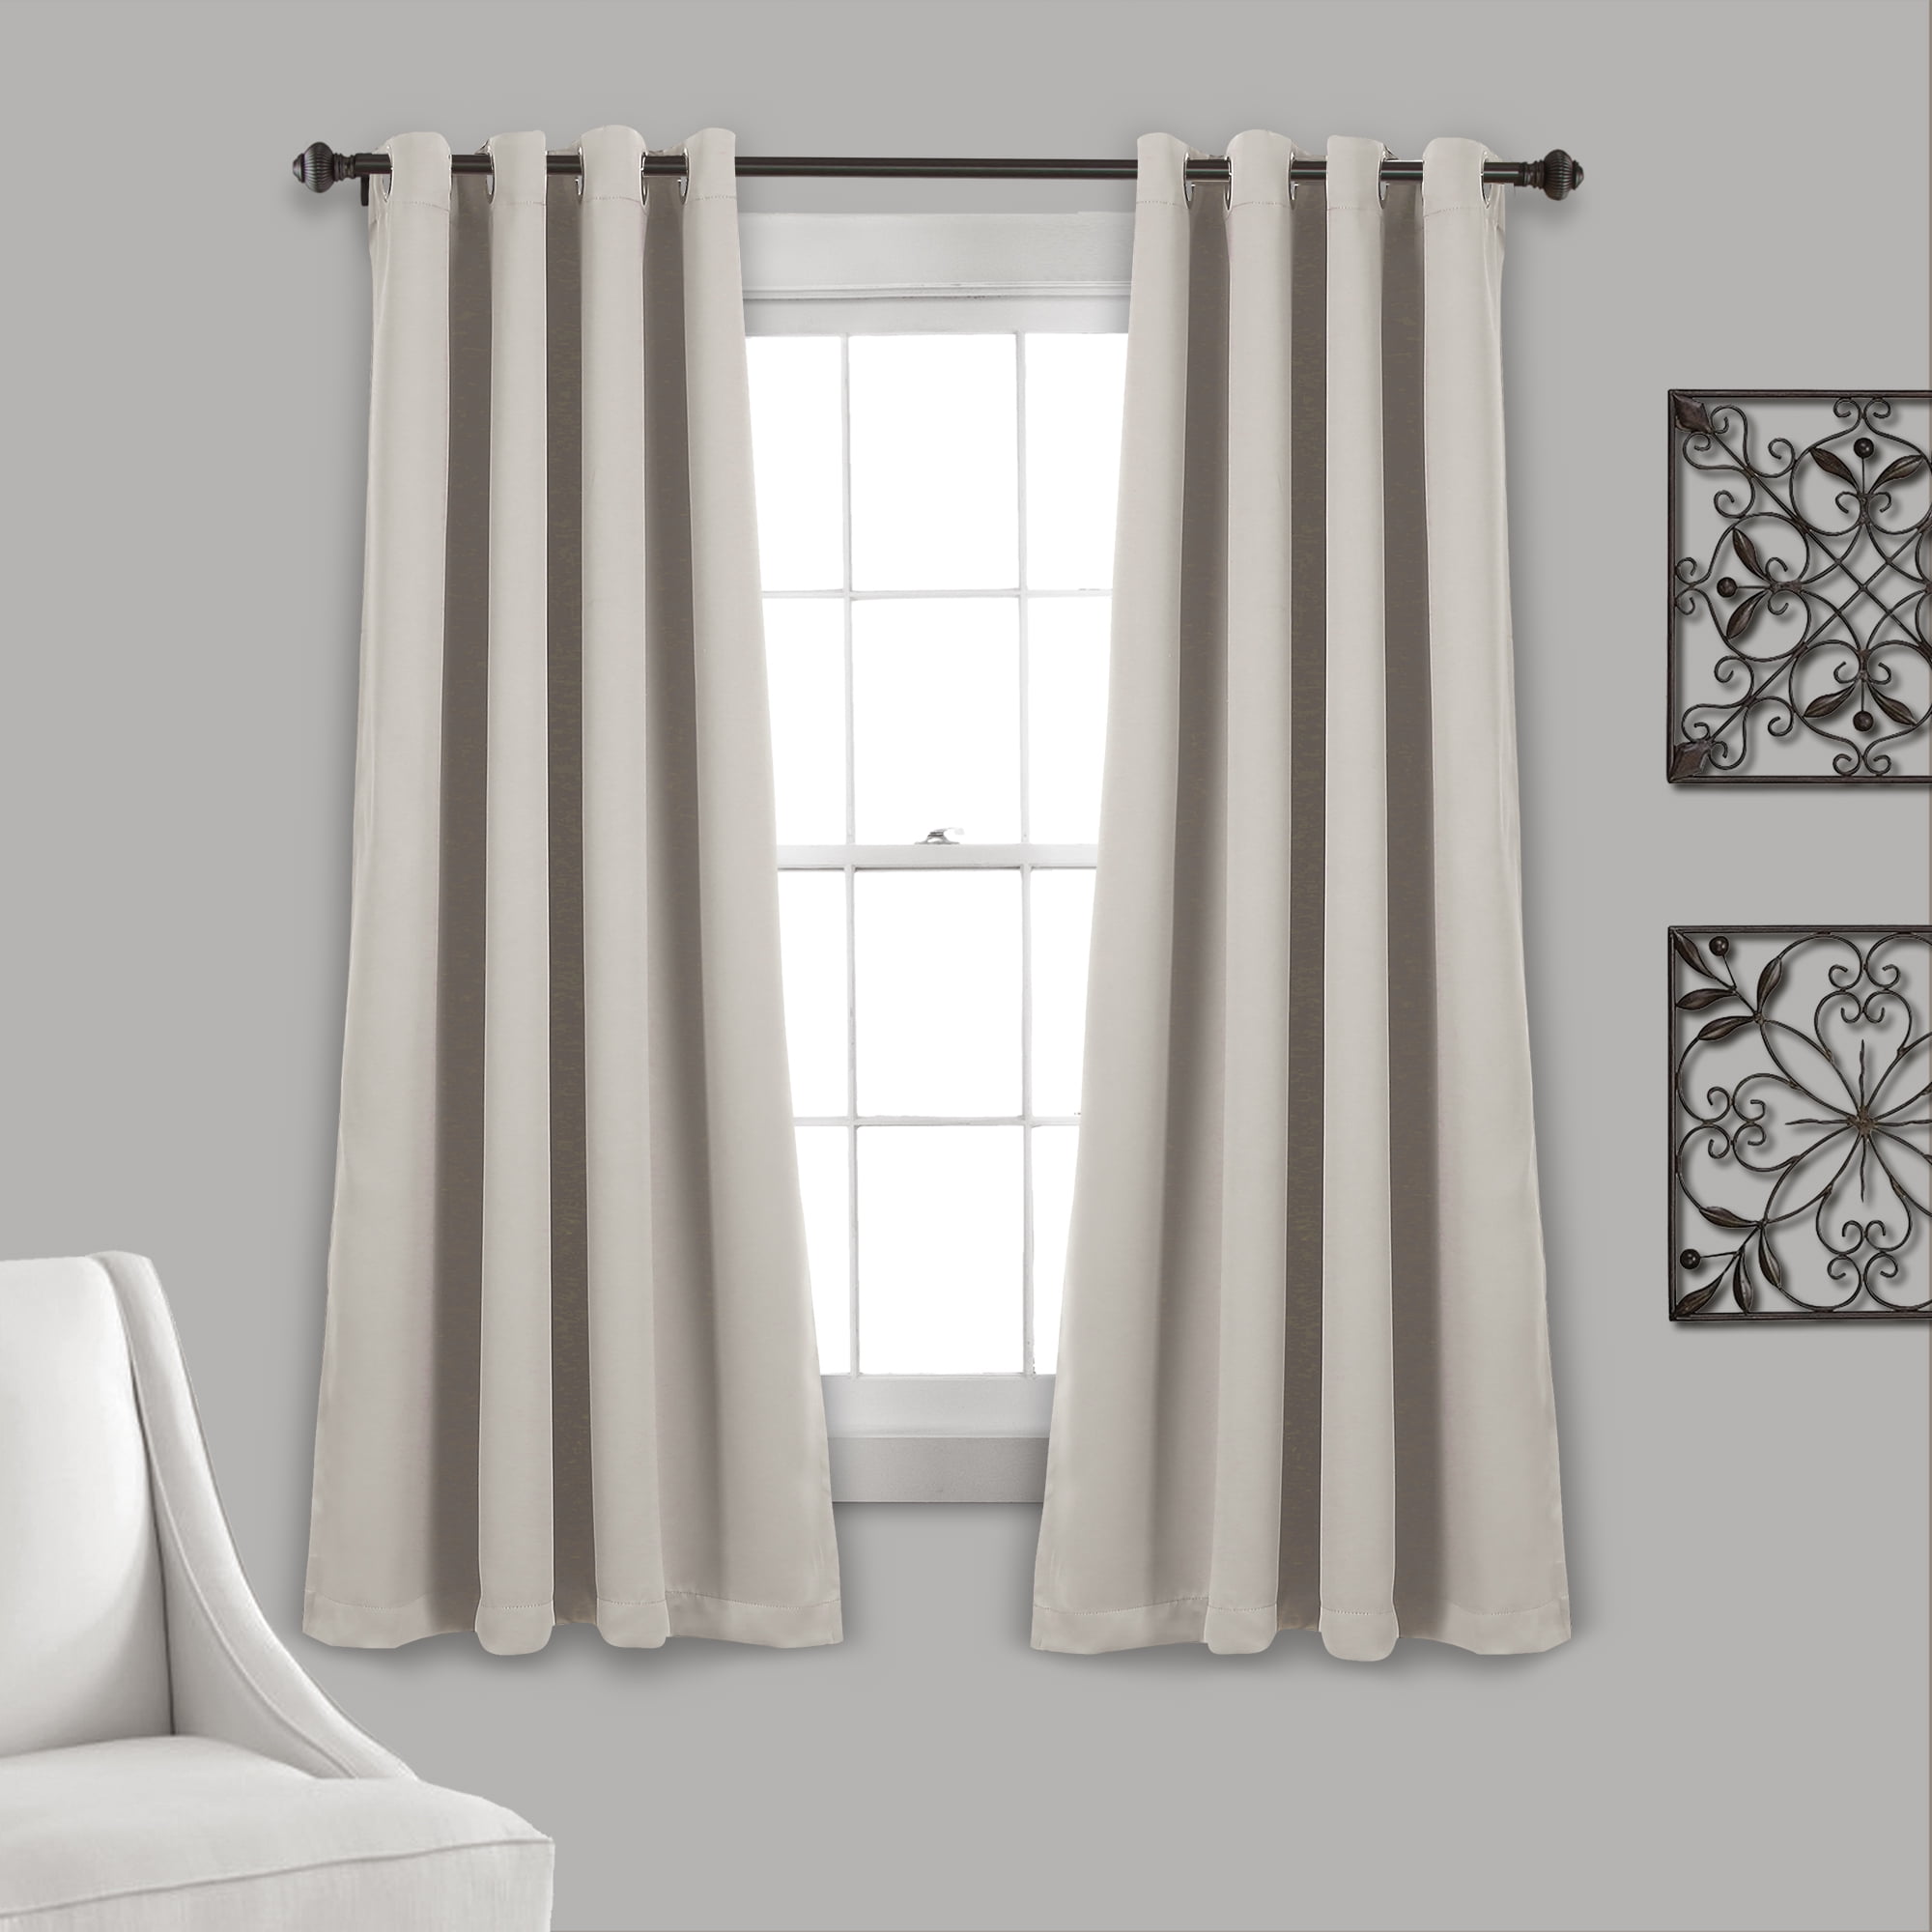 Details about   2 Panels White Lined Heavy Thick Blackout Grommet Window Curtain 52"W x 63" 84"L 